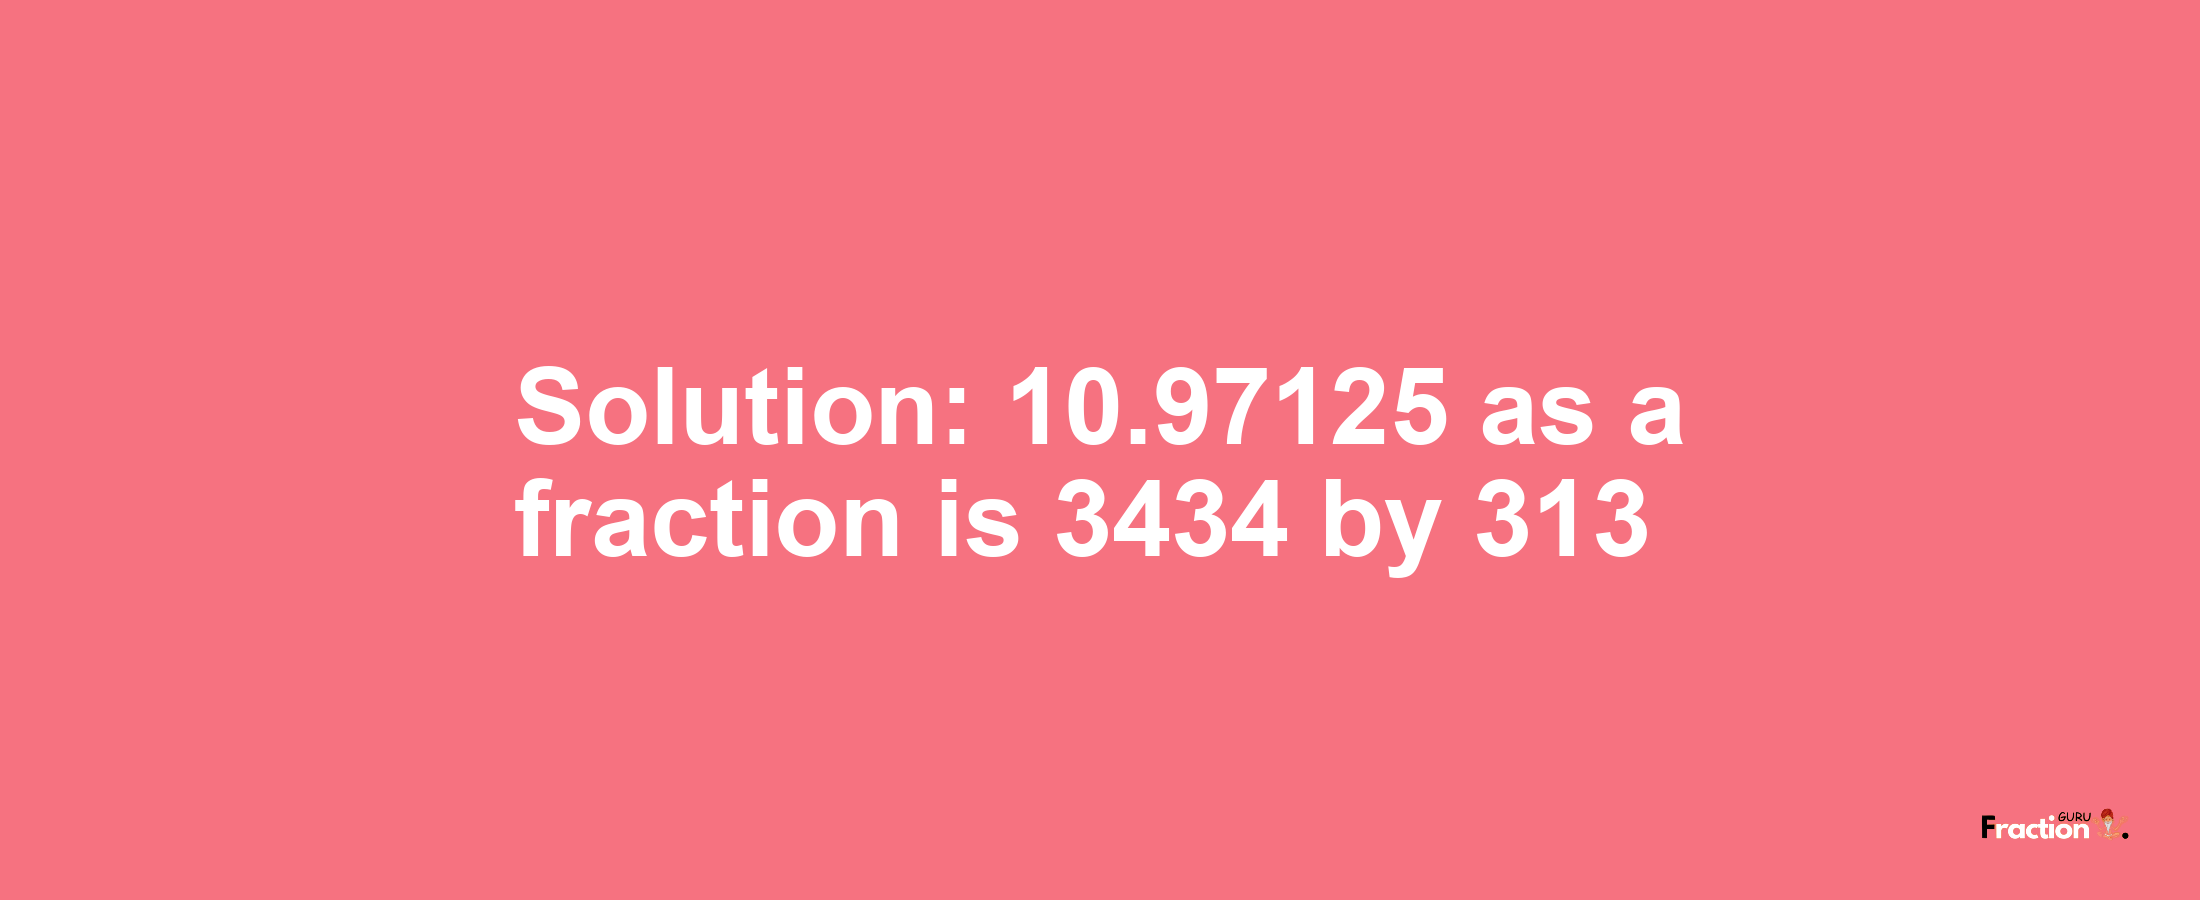 Solution:10.97125 as a fraction is 3434/313